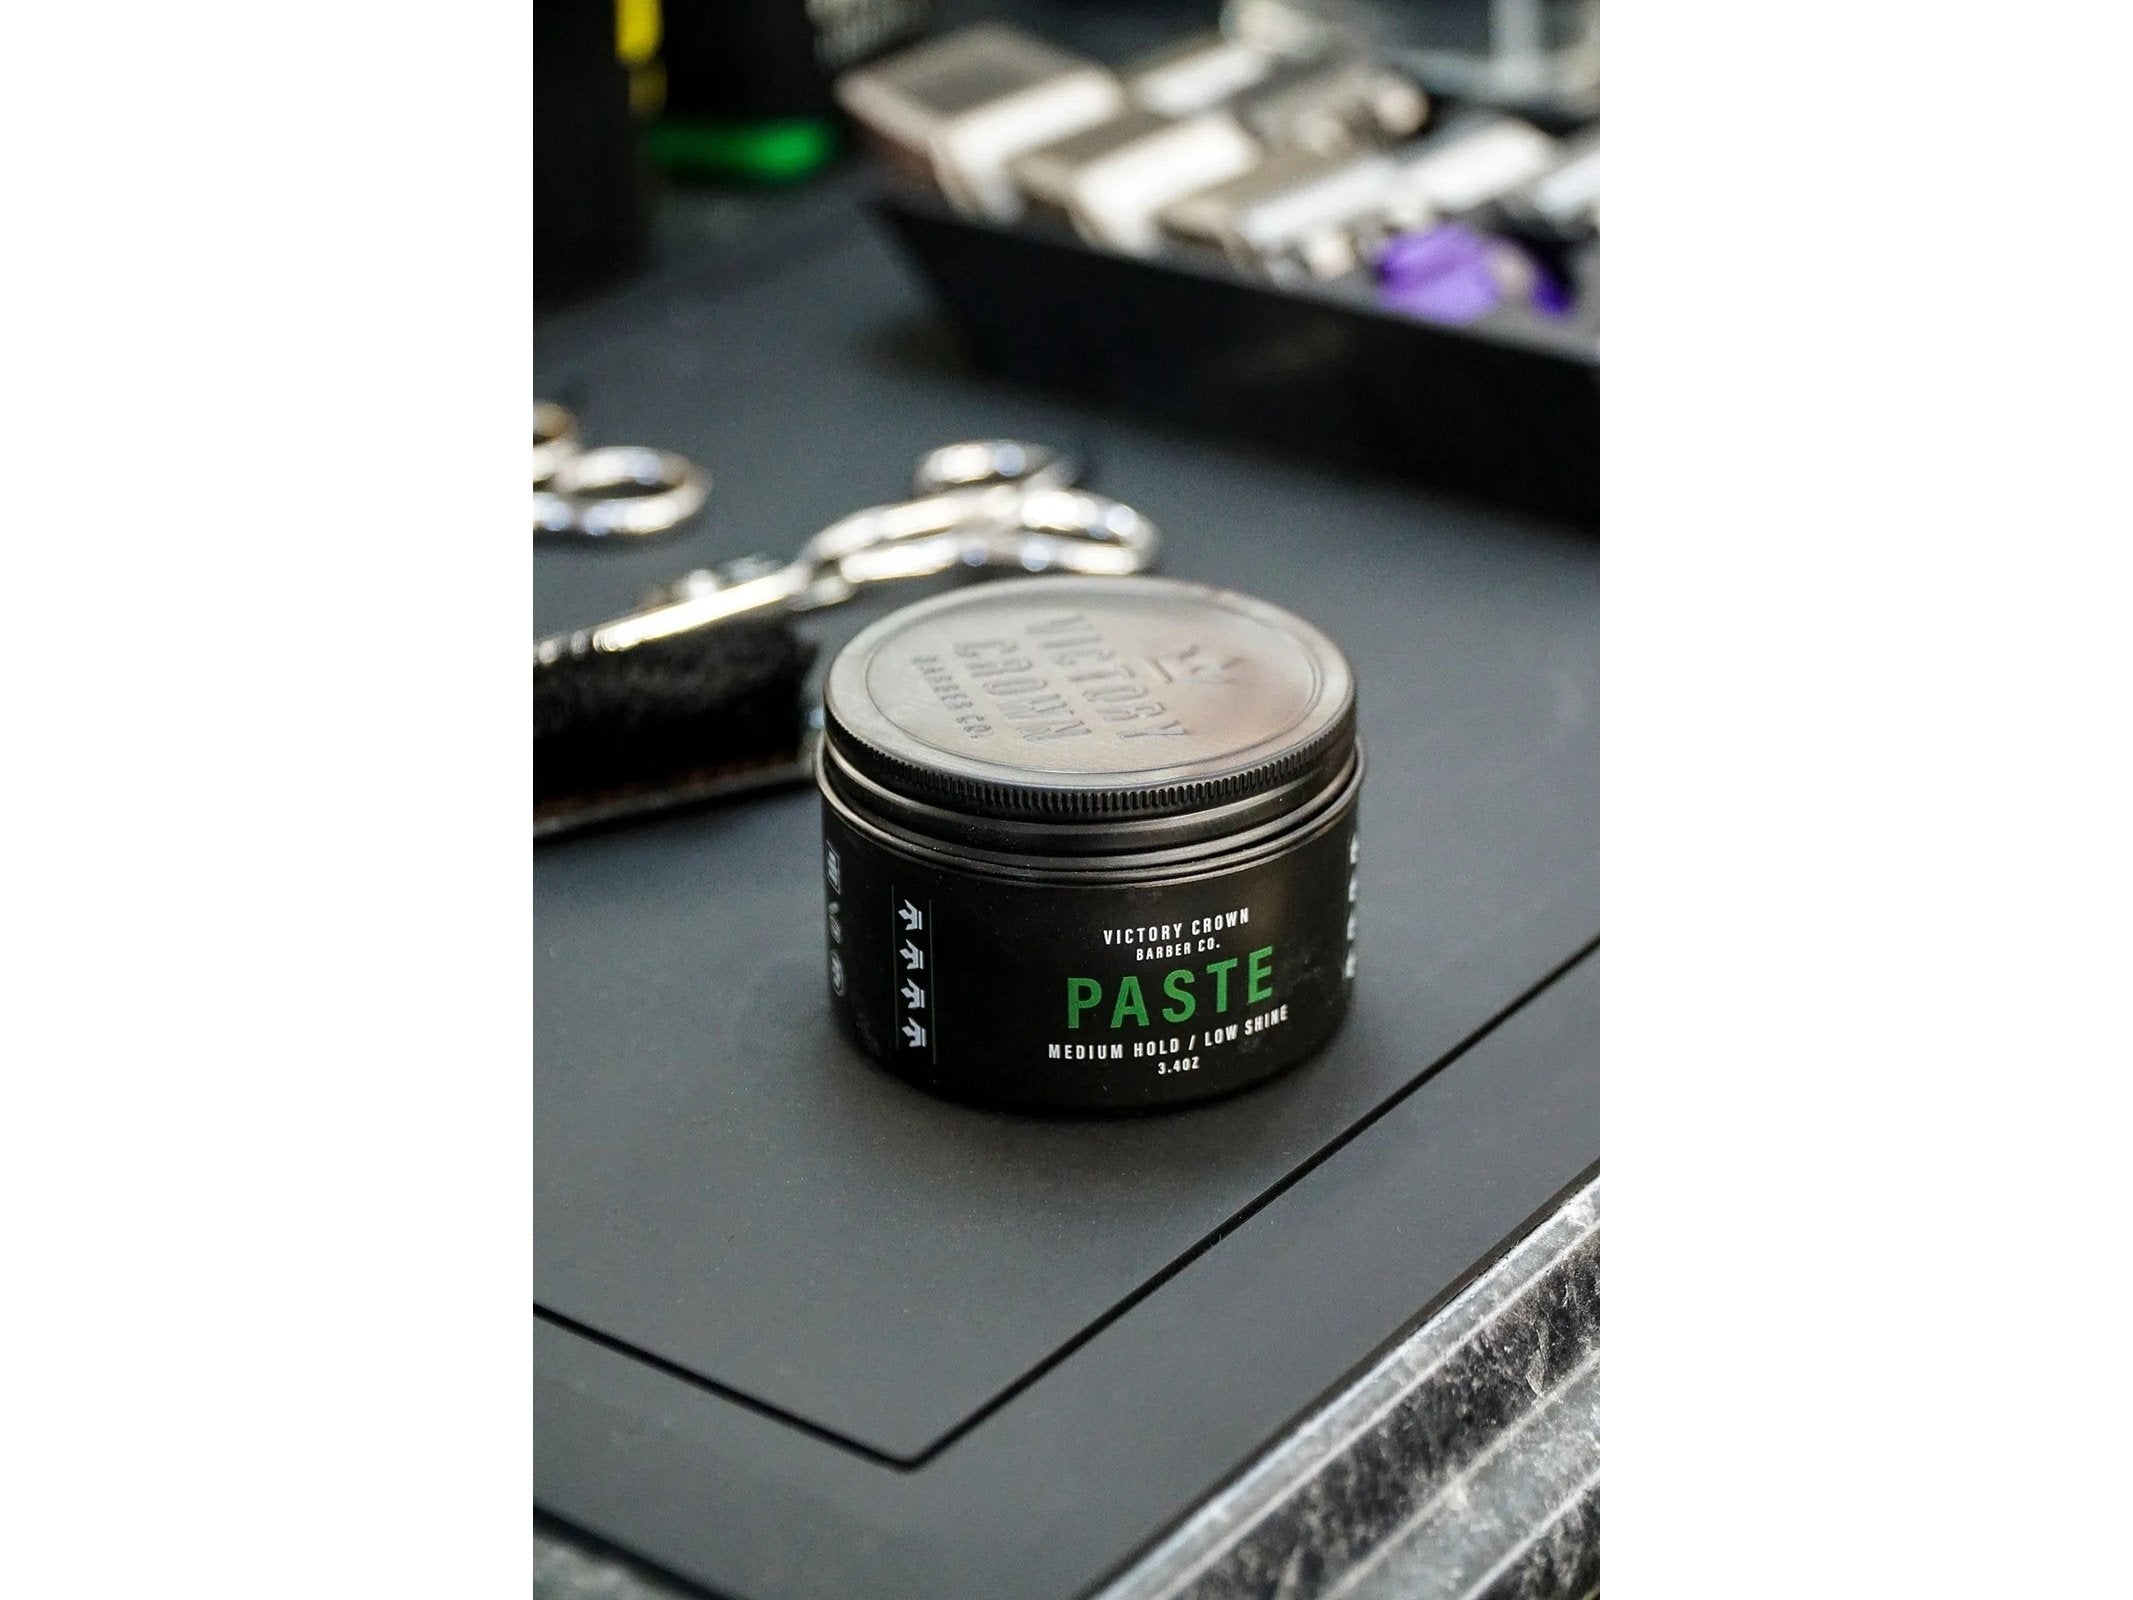 Load image into Gallery viewer, Victory Crown Paste, 3.4 oz.
